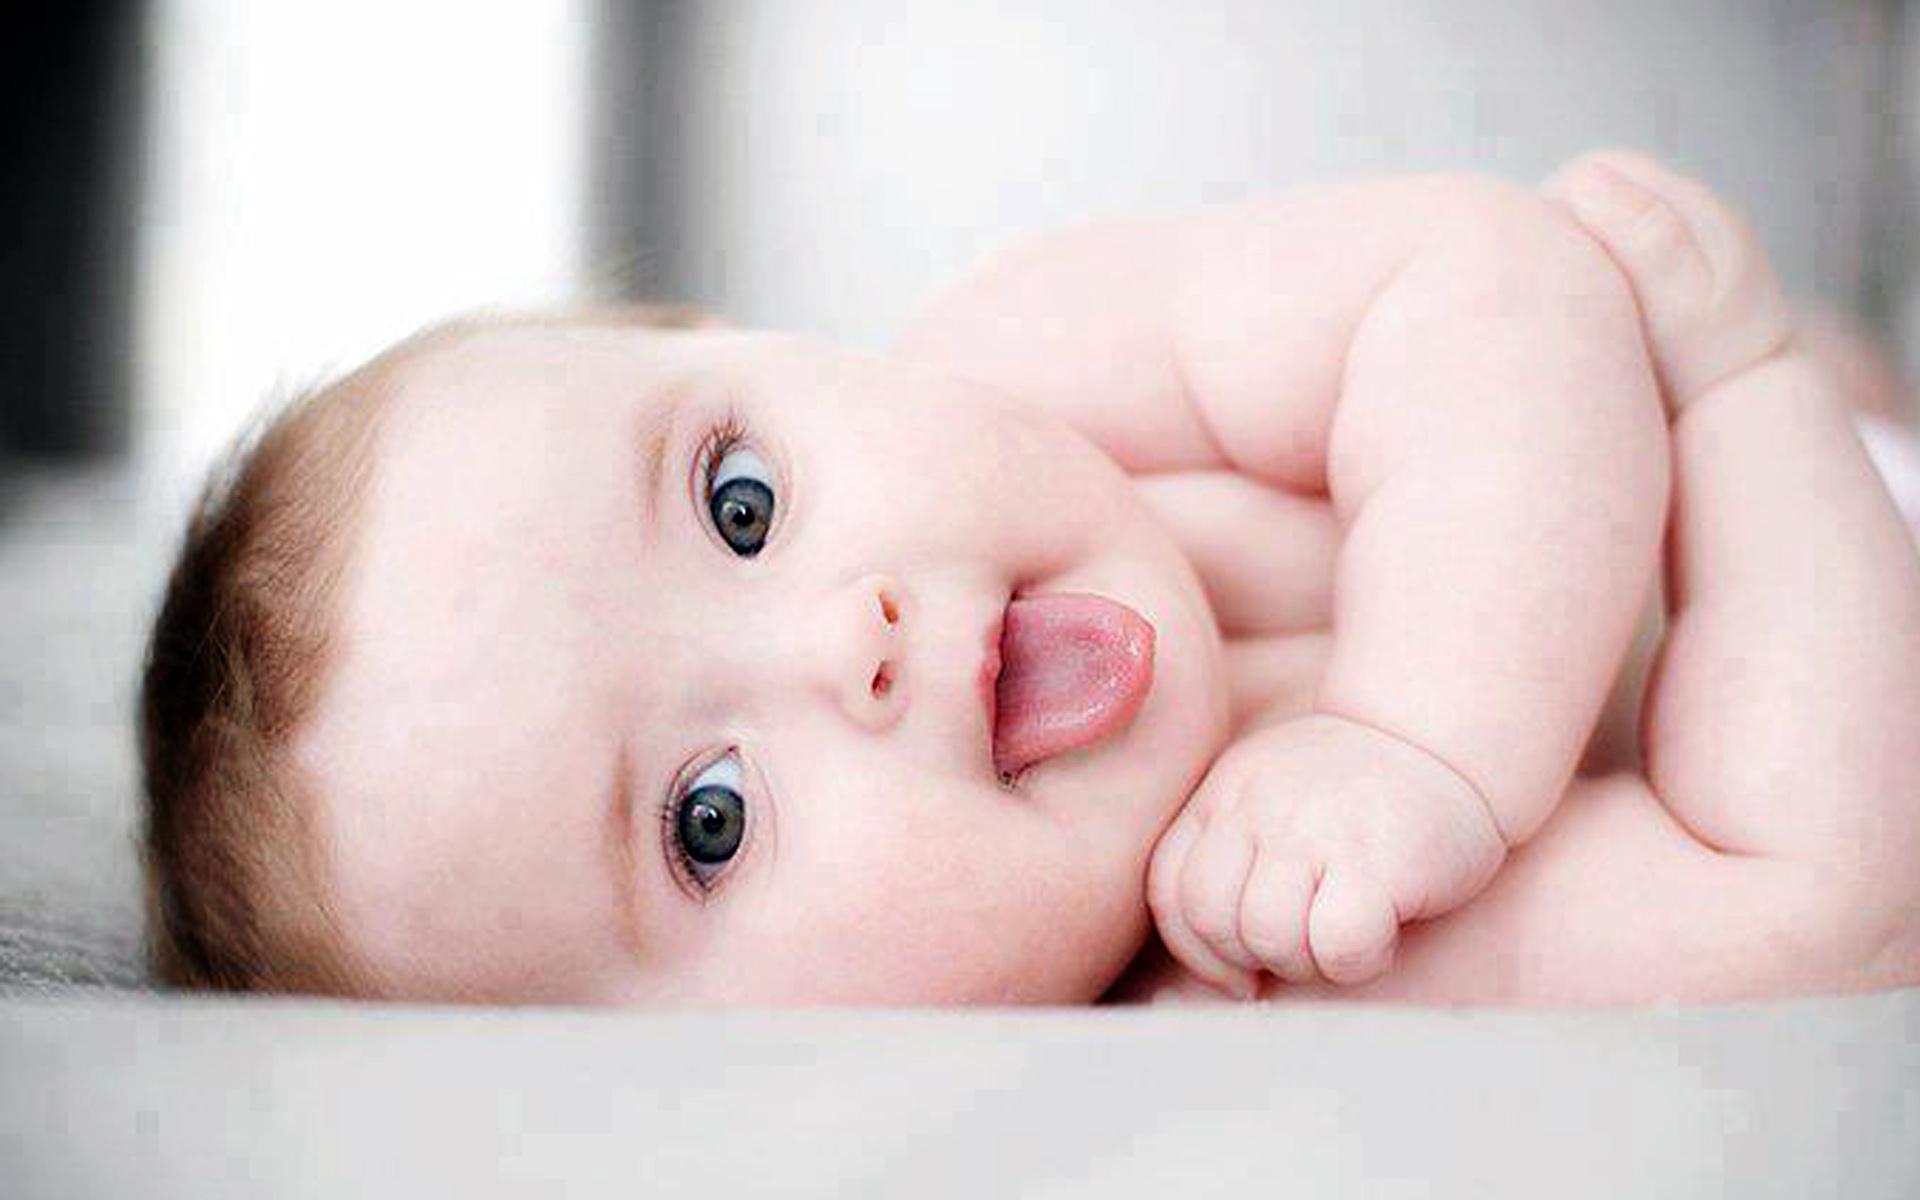 Small Baby Photo Wallpaper HD, Picture